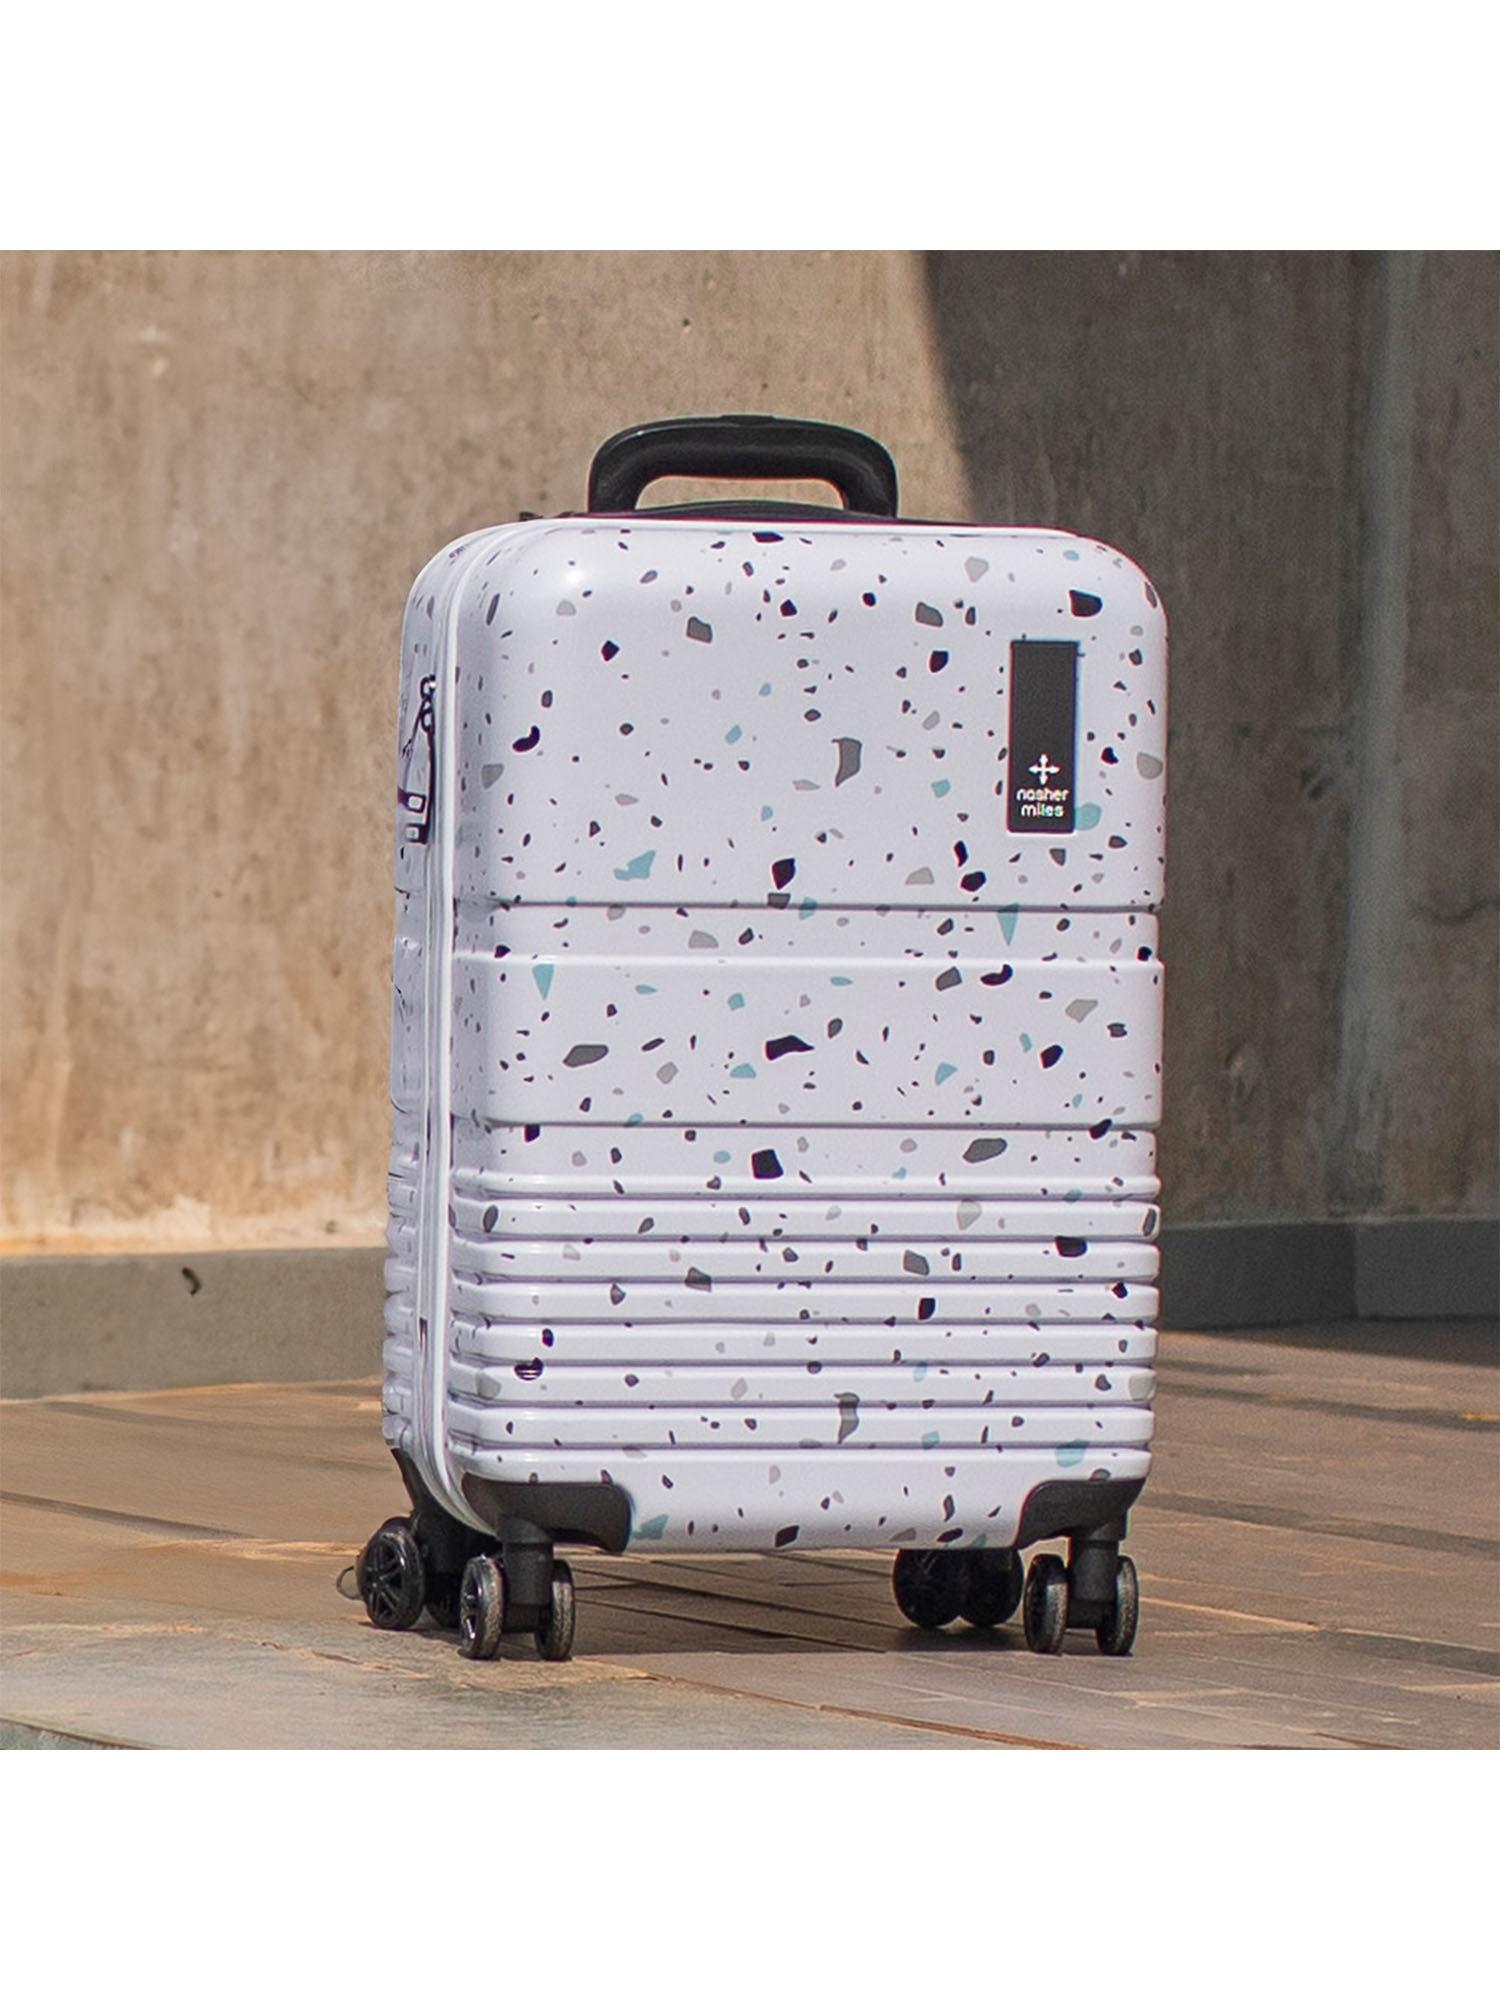 venice-hard-sided-polycarbonate-cabin-luggage-terrazzo-printed-black-trolley-bag